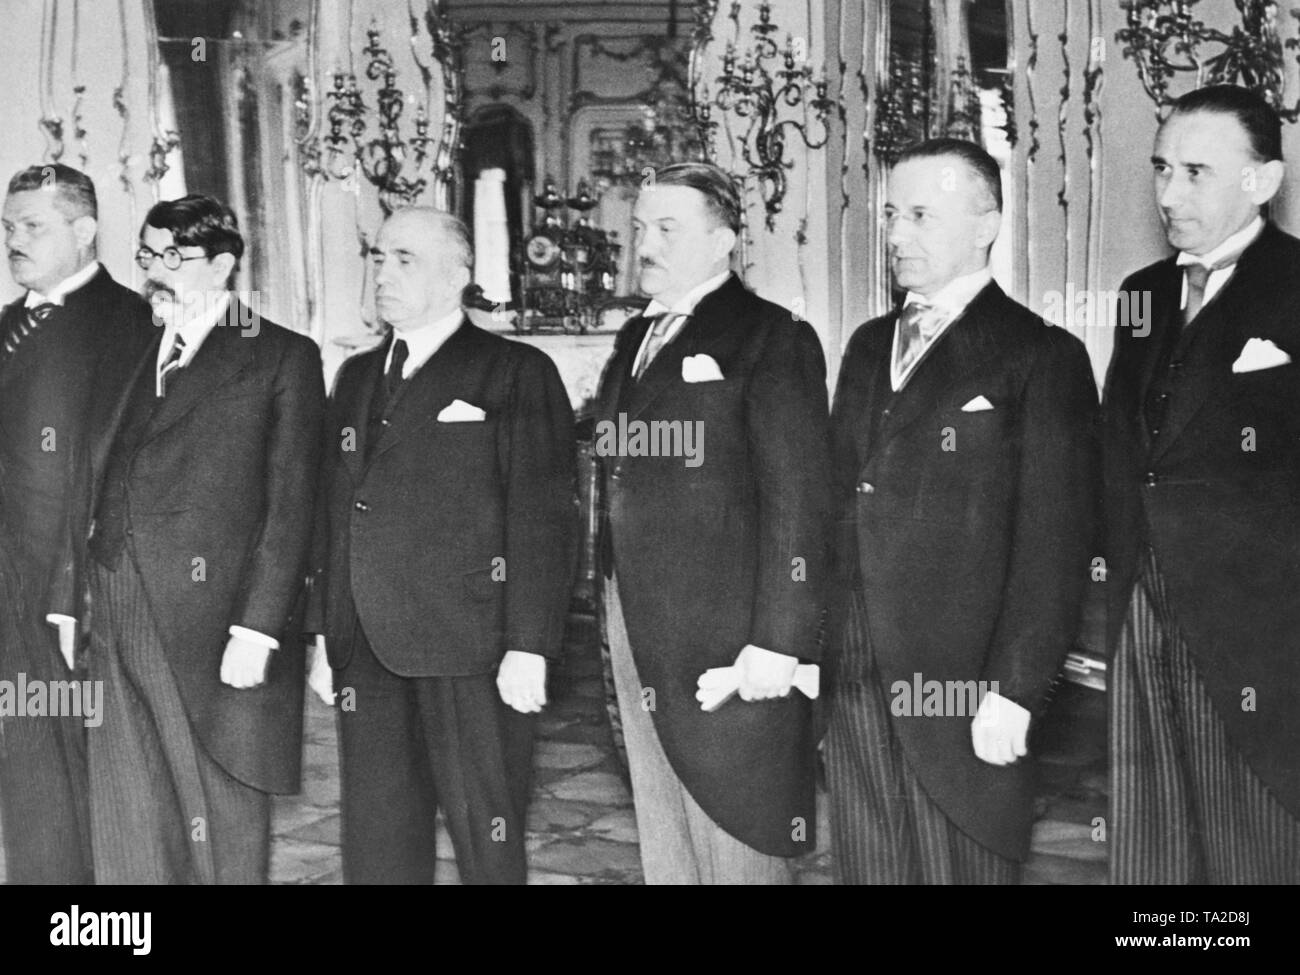 After the occupation of Bohemia and Moravia and the establishment of the Protectorate of Bohemia and Moravia, the new government is presented in Prague. From left to right: Dominik Cipera (Minister of Public Works), Vladimir Sadek (Minister of Trade), Johann Kapras (Education Minister), Alois Elias (Prime Minister), Ladislav Feierabend (Minister of Agriculture) and Josef Kalfus (Minister of Finance). Stock Photo